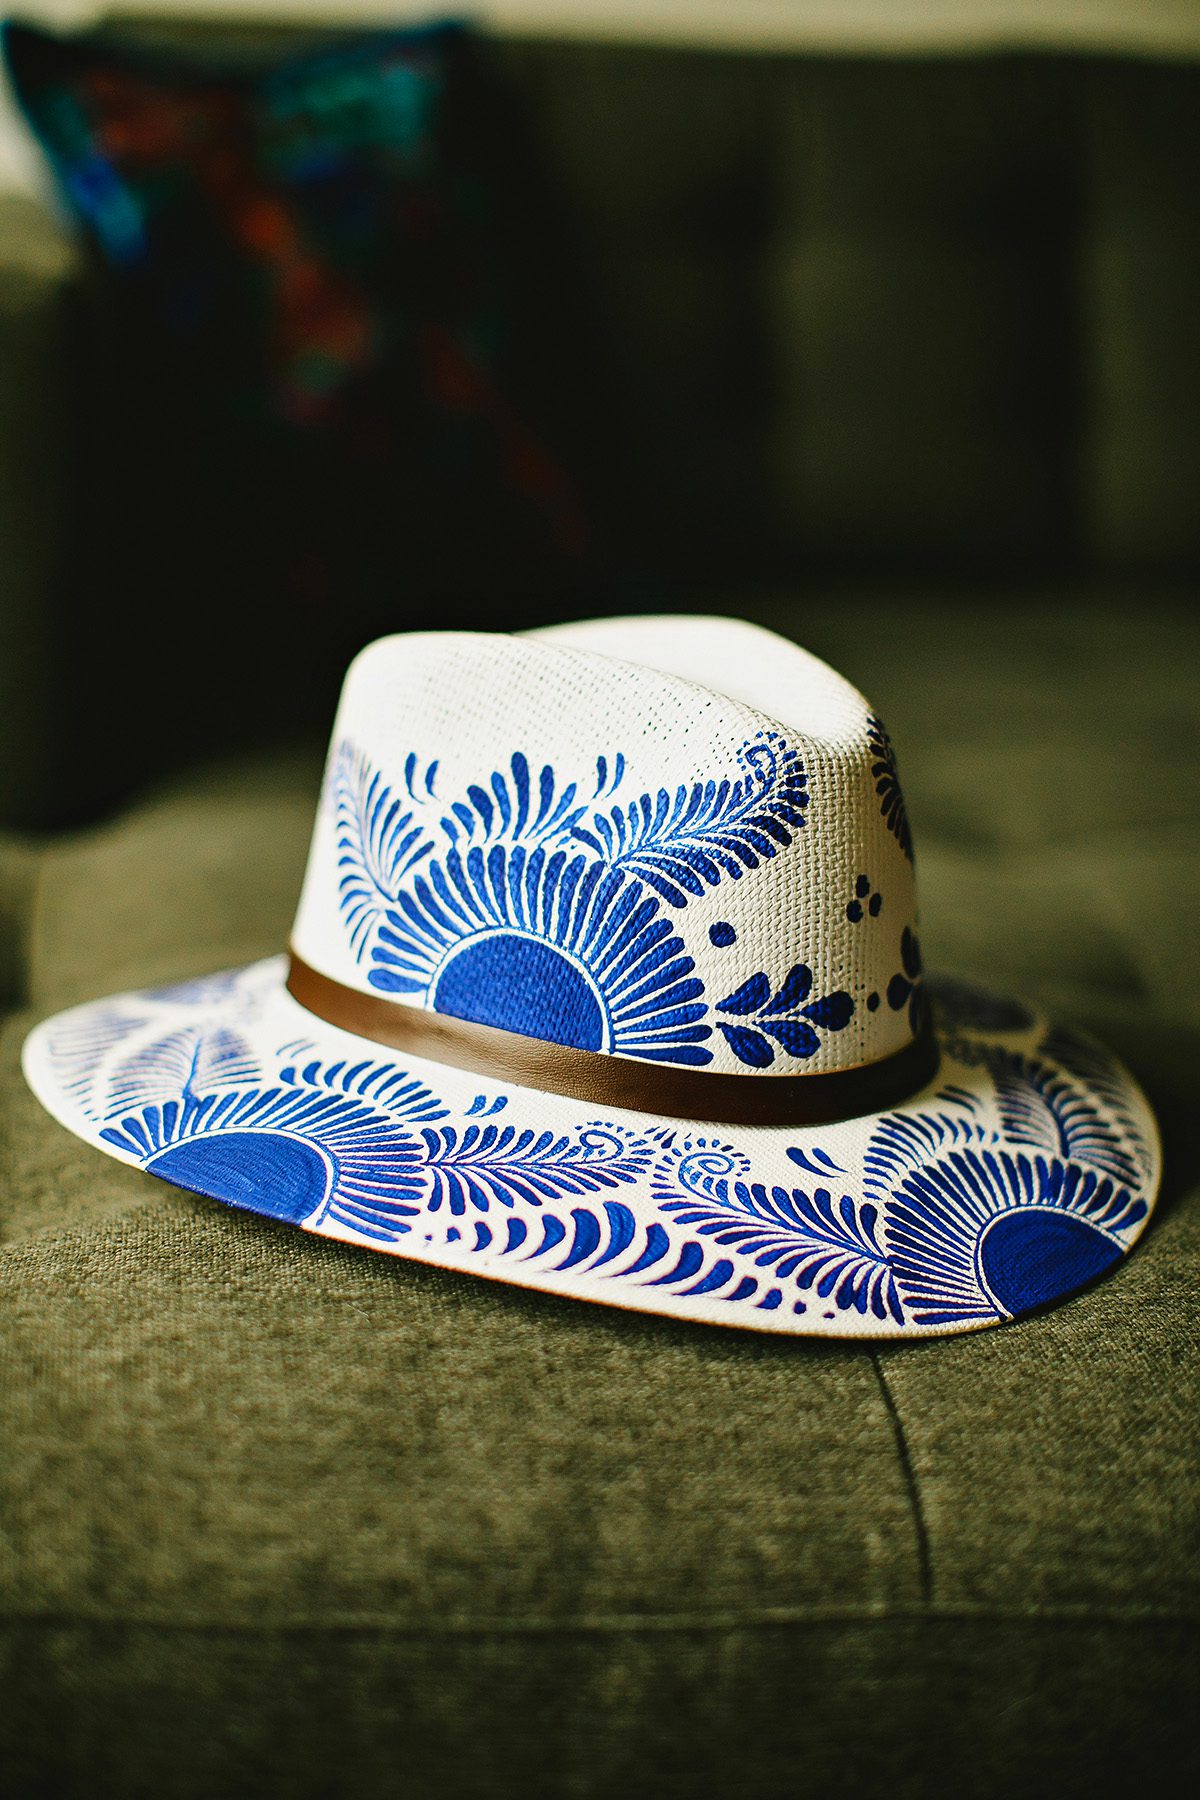 Yazmin Origins Mexico, Dripping Springs small business, hand painted hat